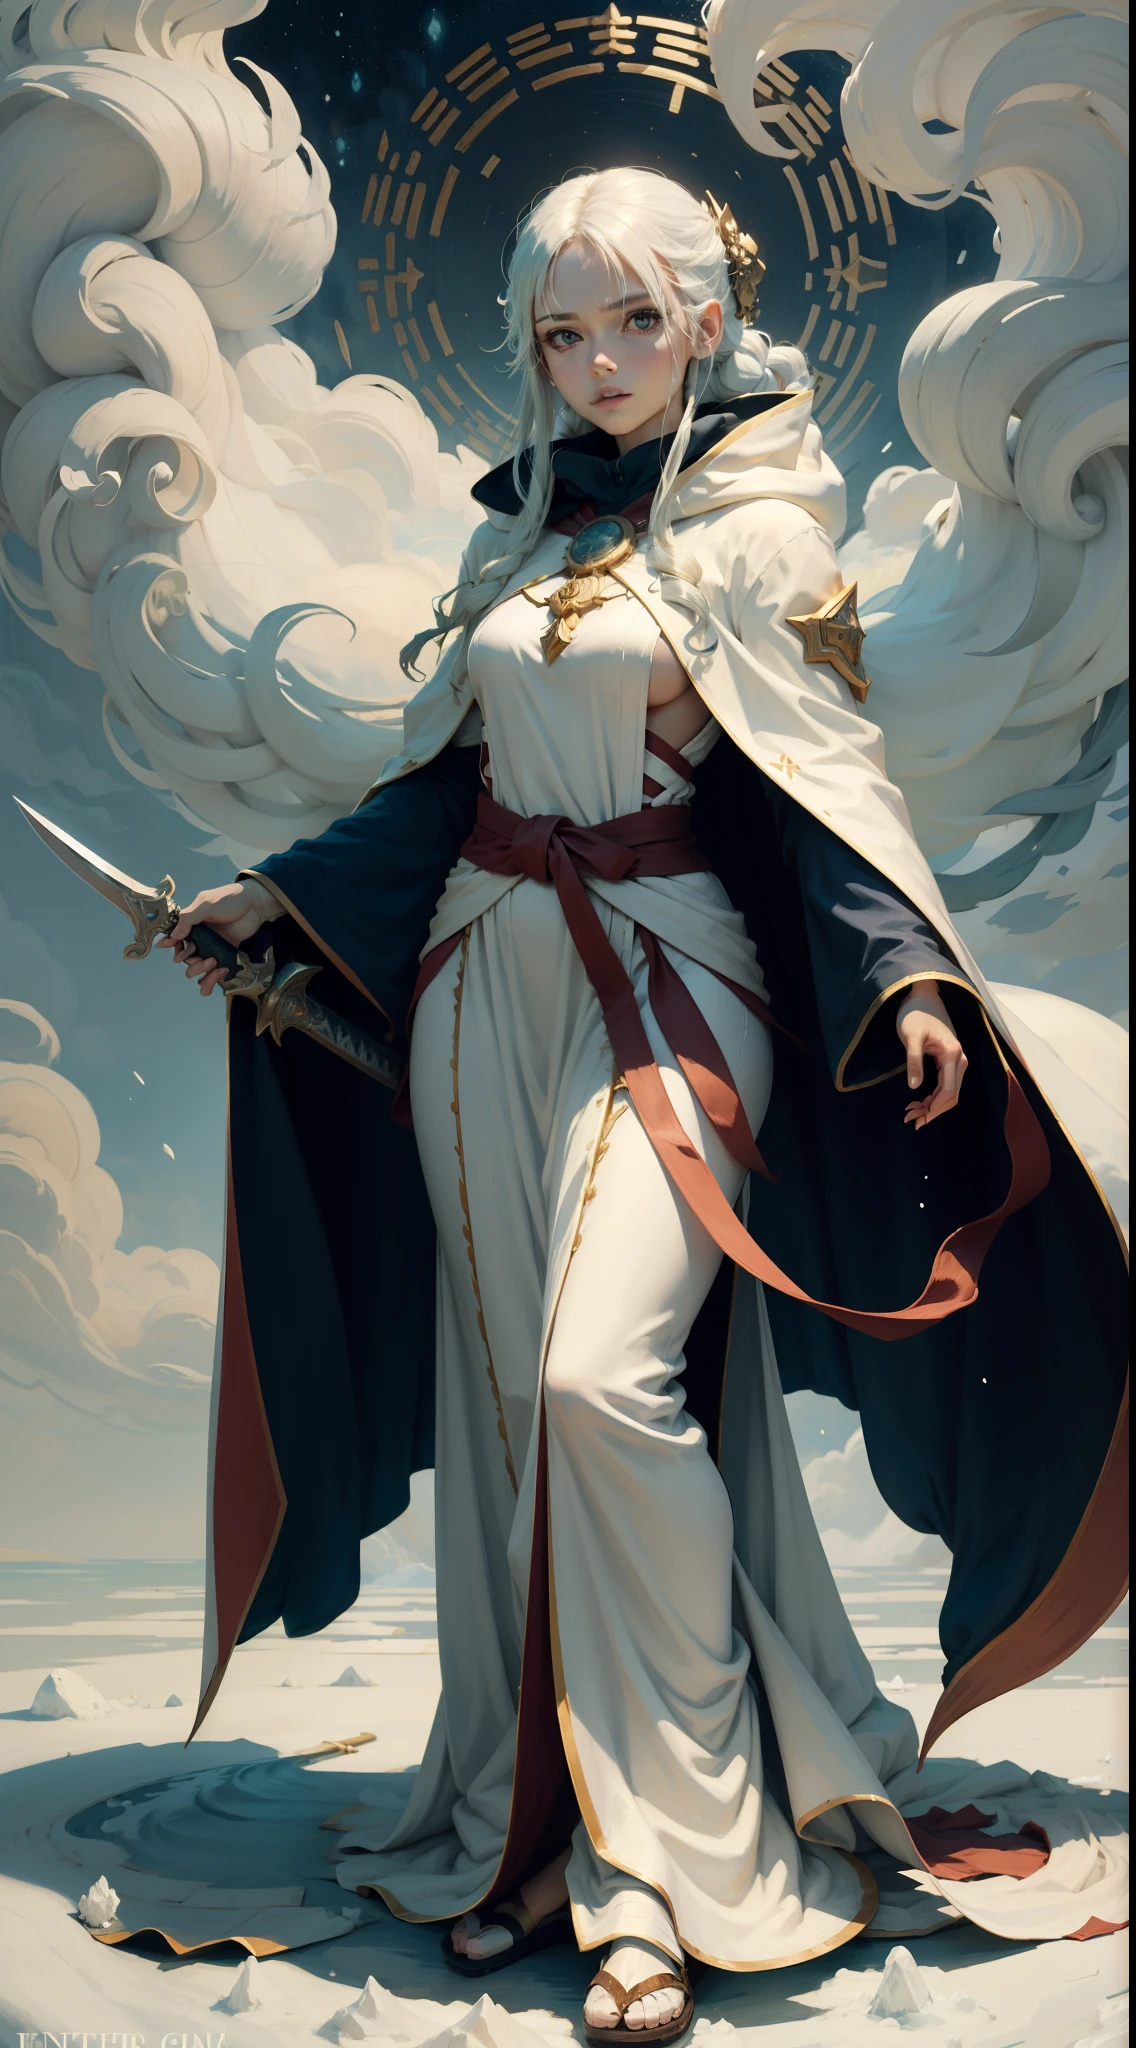 highest masterpiece，richcolors，ethereal anime，White-haired god，anime style like fate，absurderes，hairstyle fax，Eyes，The environment changes，hairstyle fax，As estrelas，charturnbetalora，((4K,Masterpiece,Best quality))，Anime girl in white dress with sword in snow, down view，flowing magical robe，ethereal anime，wearing a long flowing robe, Beautiful celestial mage，Flowing white robe，cotton cloud mage robes, Wearing a flowing cloak, Beautiful fantasy anime with flowing robes，claymore anime background，Black Mage，mistic，shadowy，Sign the deed，Some bizarre light，Mysterious visions